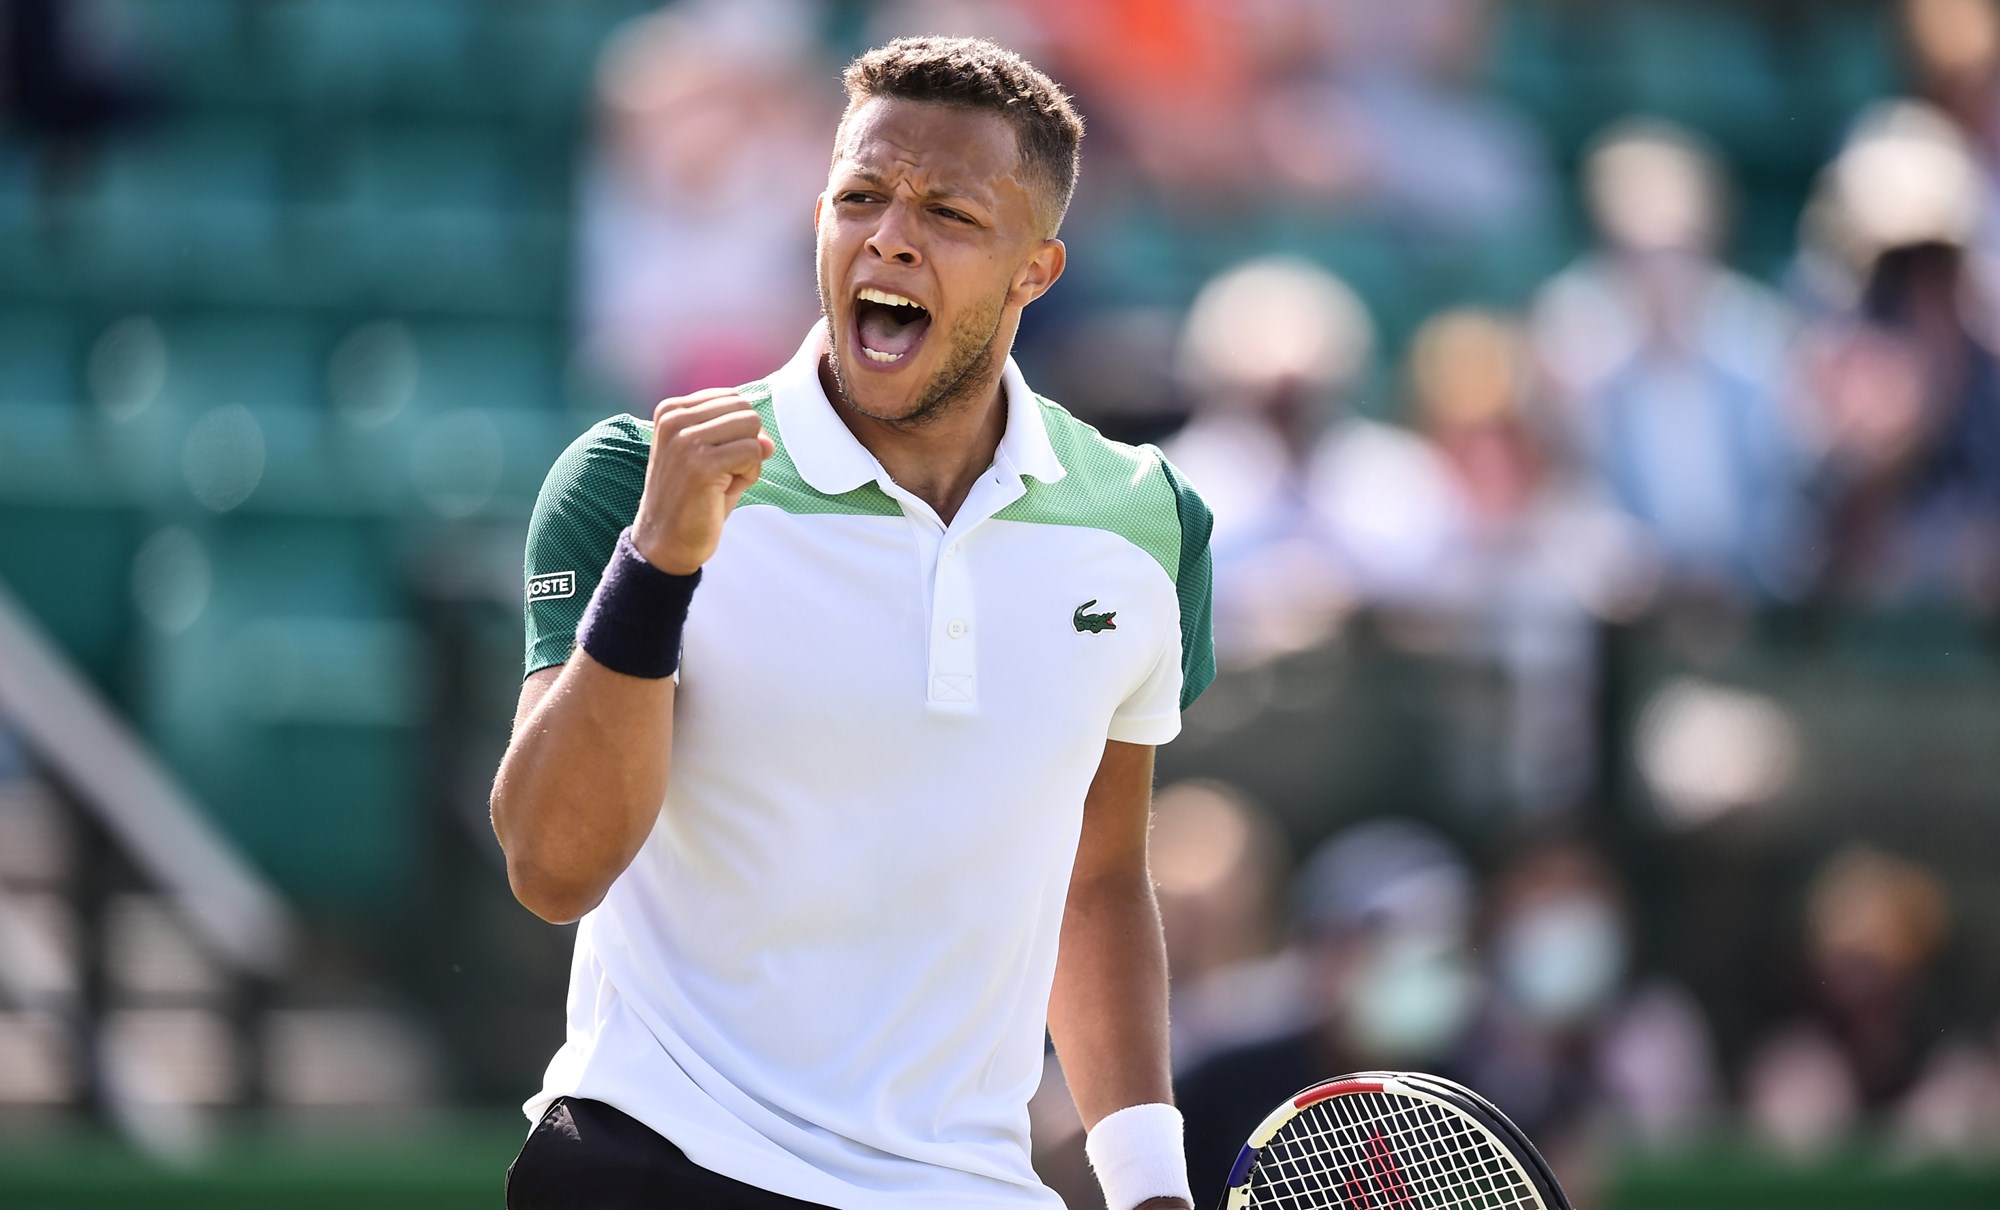 Jay Clarke celebrates after claiming a point on day four of the Nottingham Open 2021